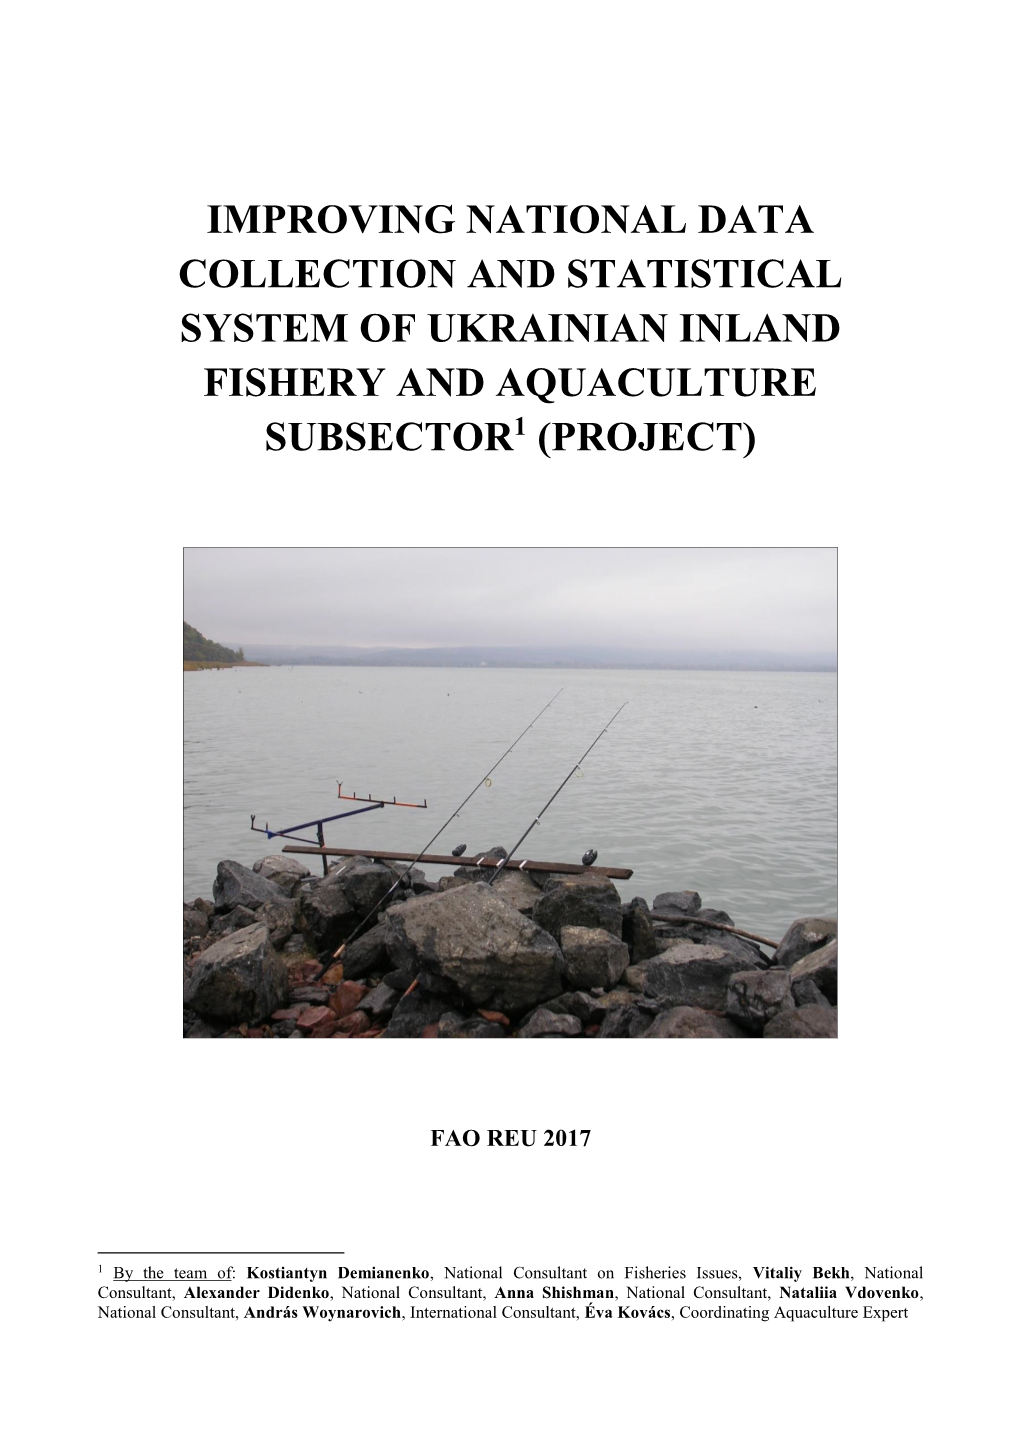 Improving National Data Collection and Statistical System of Ukrainian Inland Fishery and Aquaculture Subsector1 (Project)